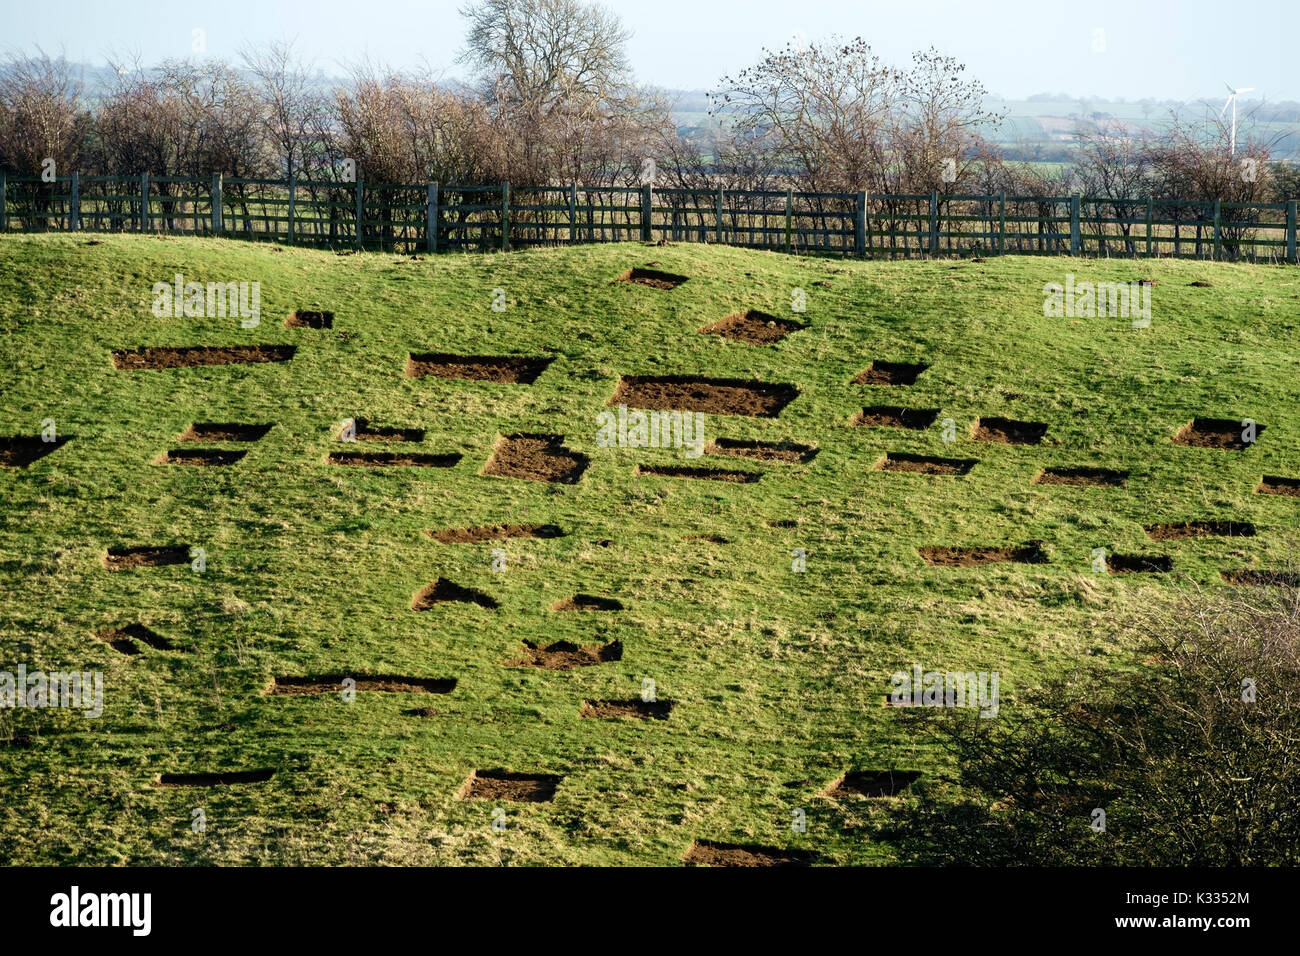 Removed grass turf patches for erosion repair of banks of ancient monument nearby, Iron age hill fort, Burrough Hill, Leicestershire, England, UK Stock Photo